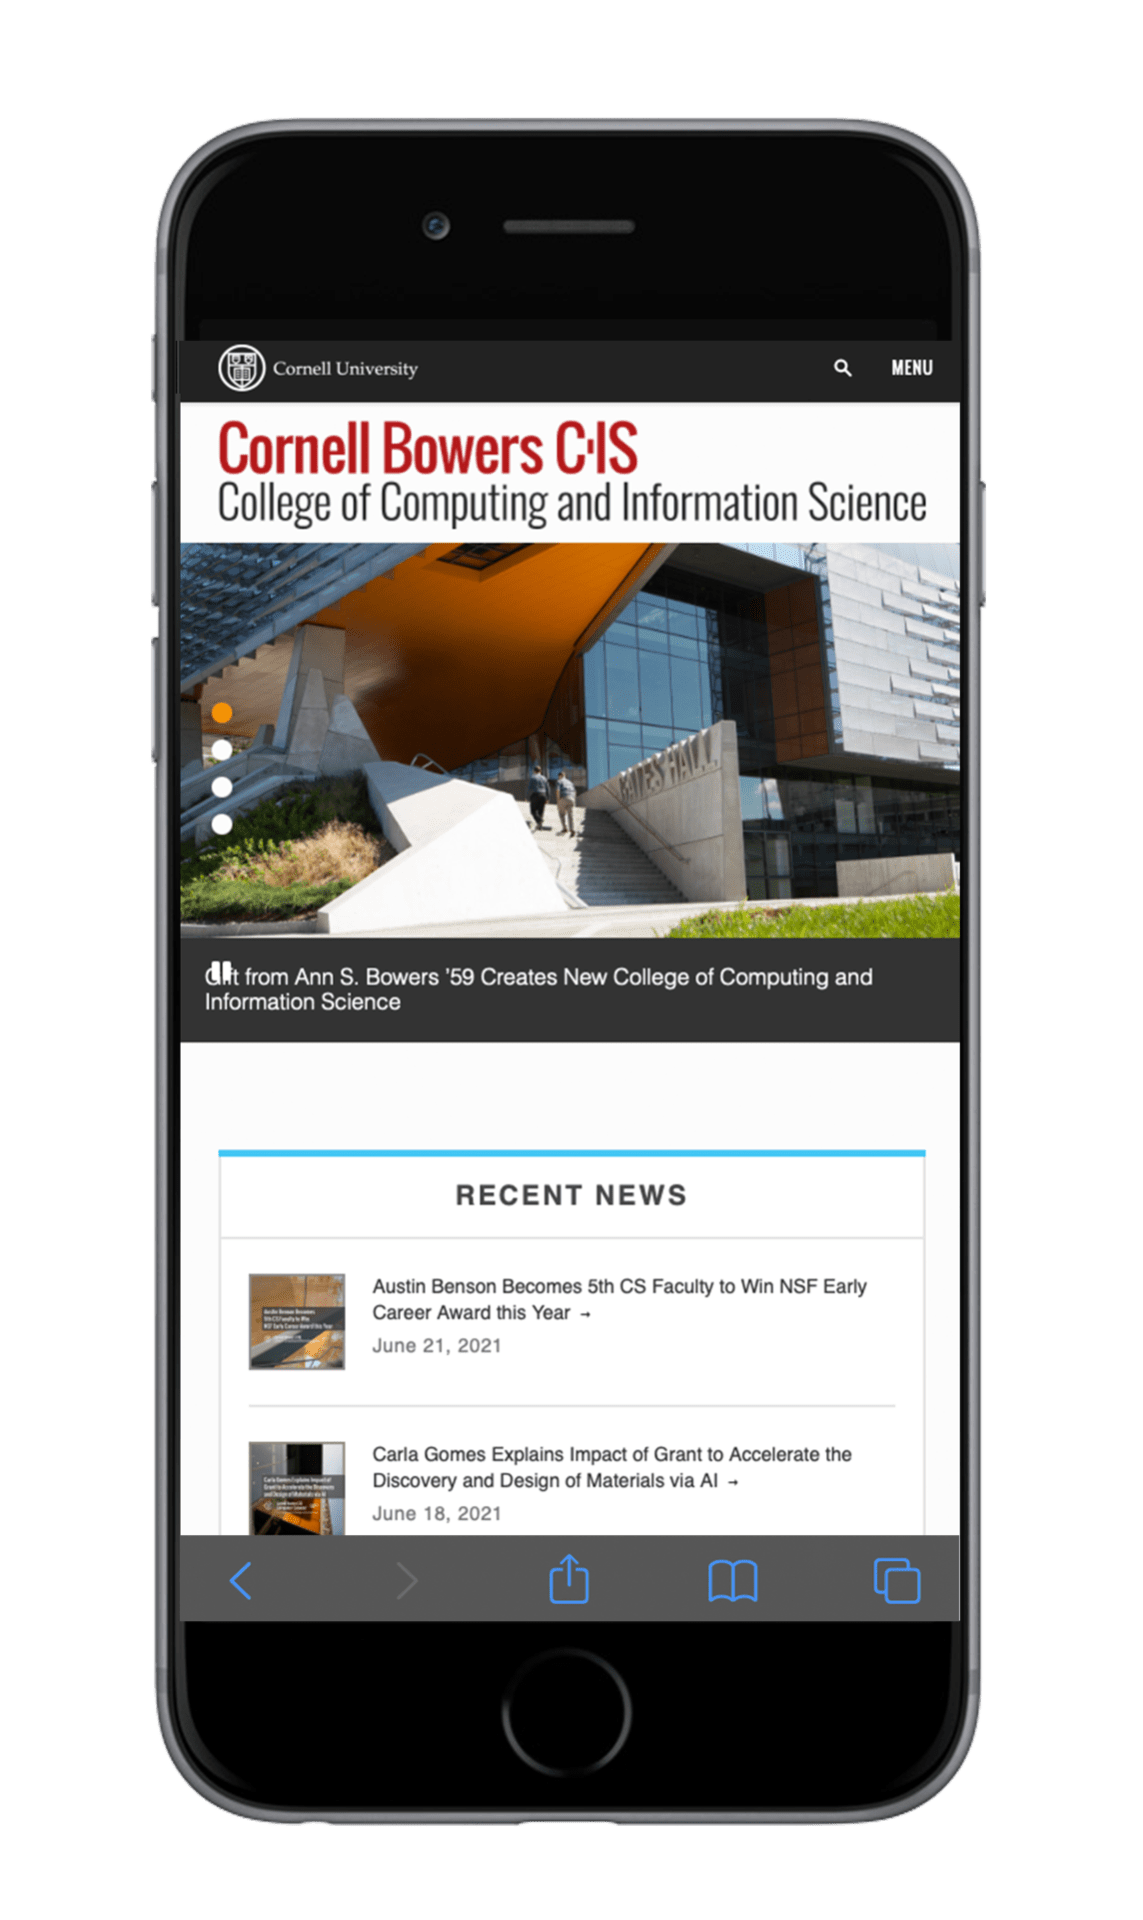 Cornell Bowers CIS mobile site